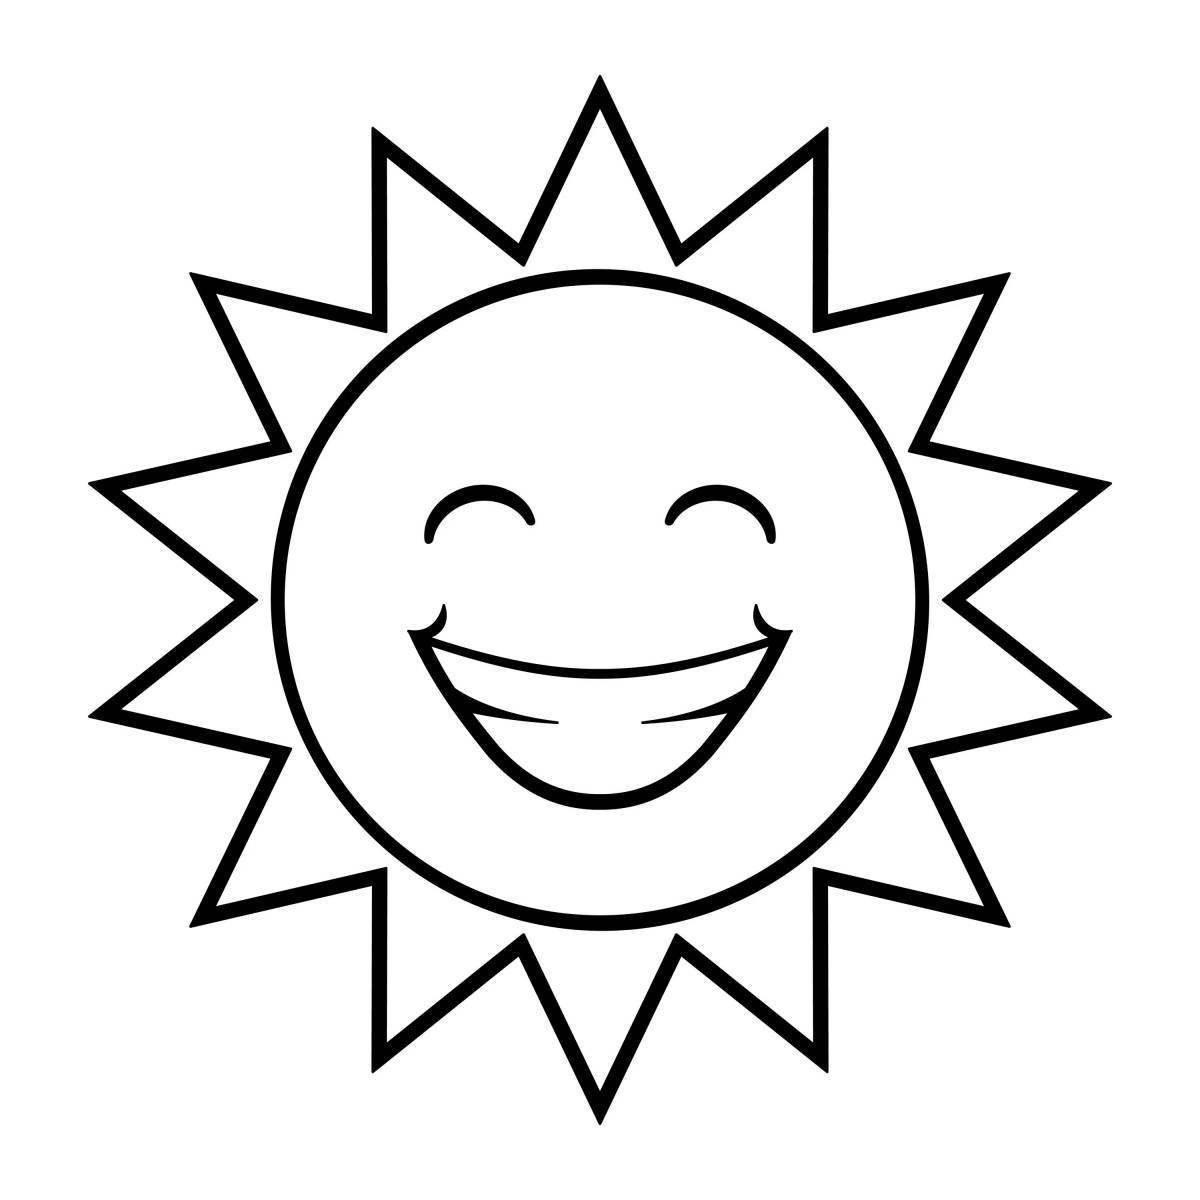 Charming sun coloring with a smile